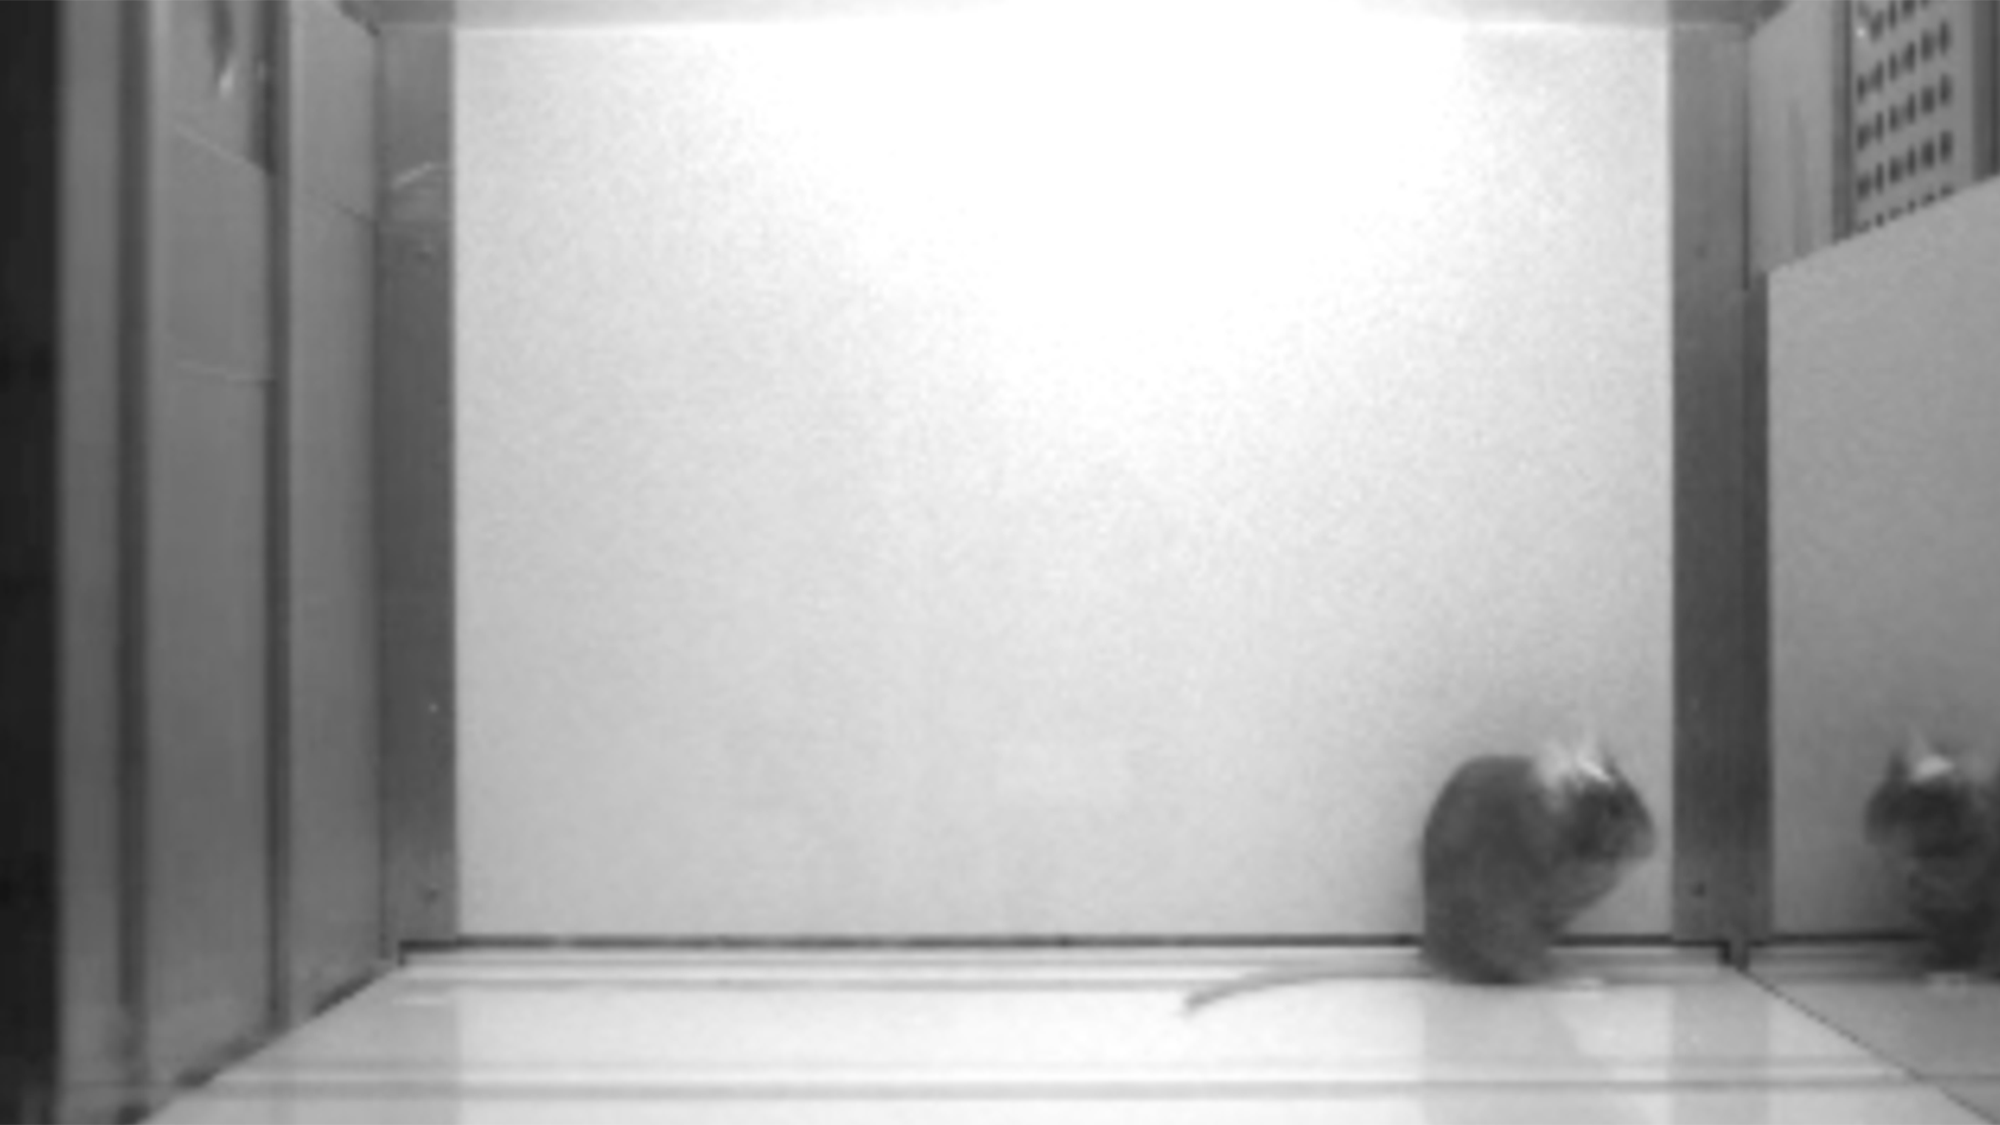 Mice may be able to recognize their own reflections